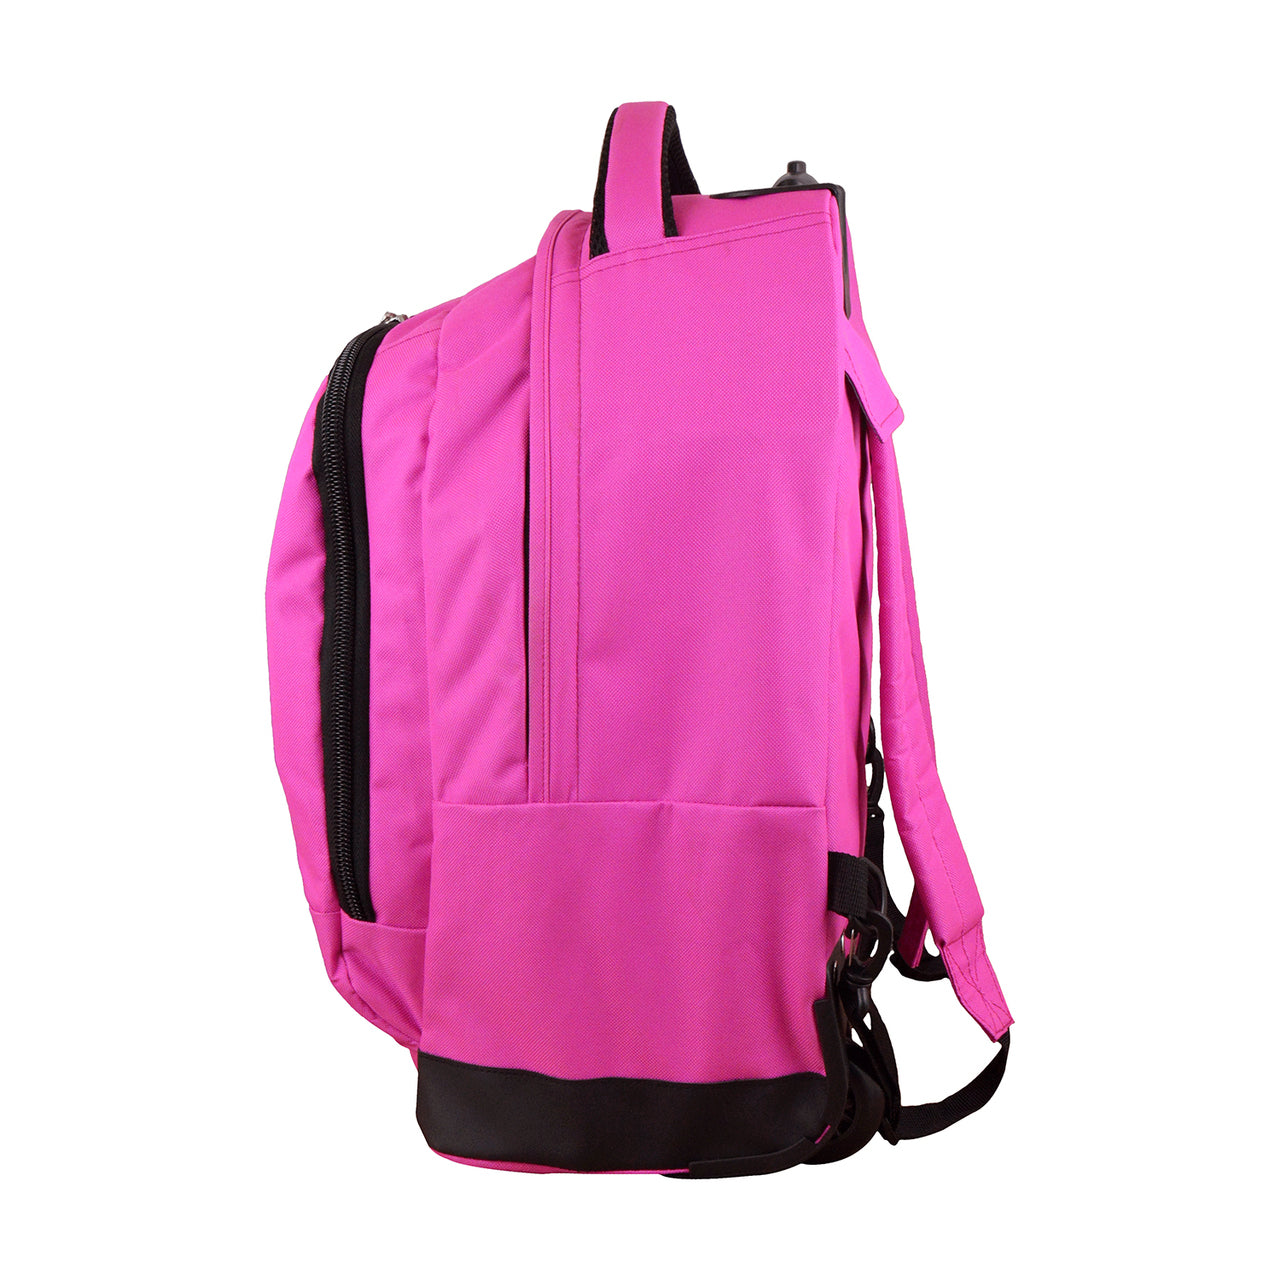 Los Angeles Clippers Premium Wheeled Backpack in Pink